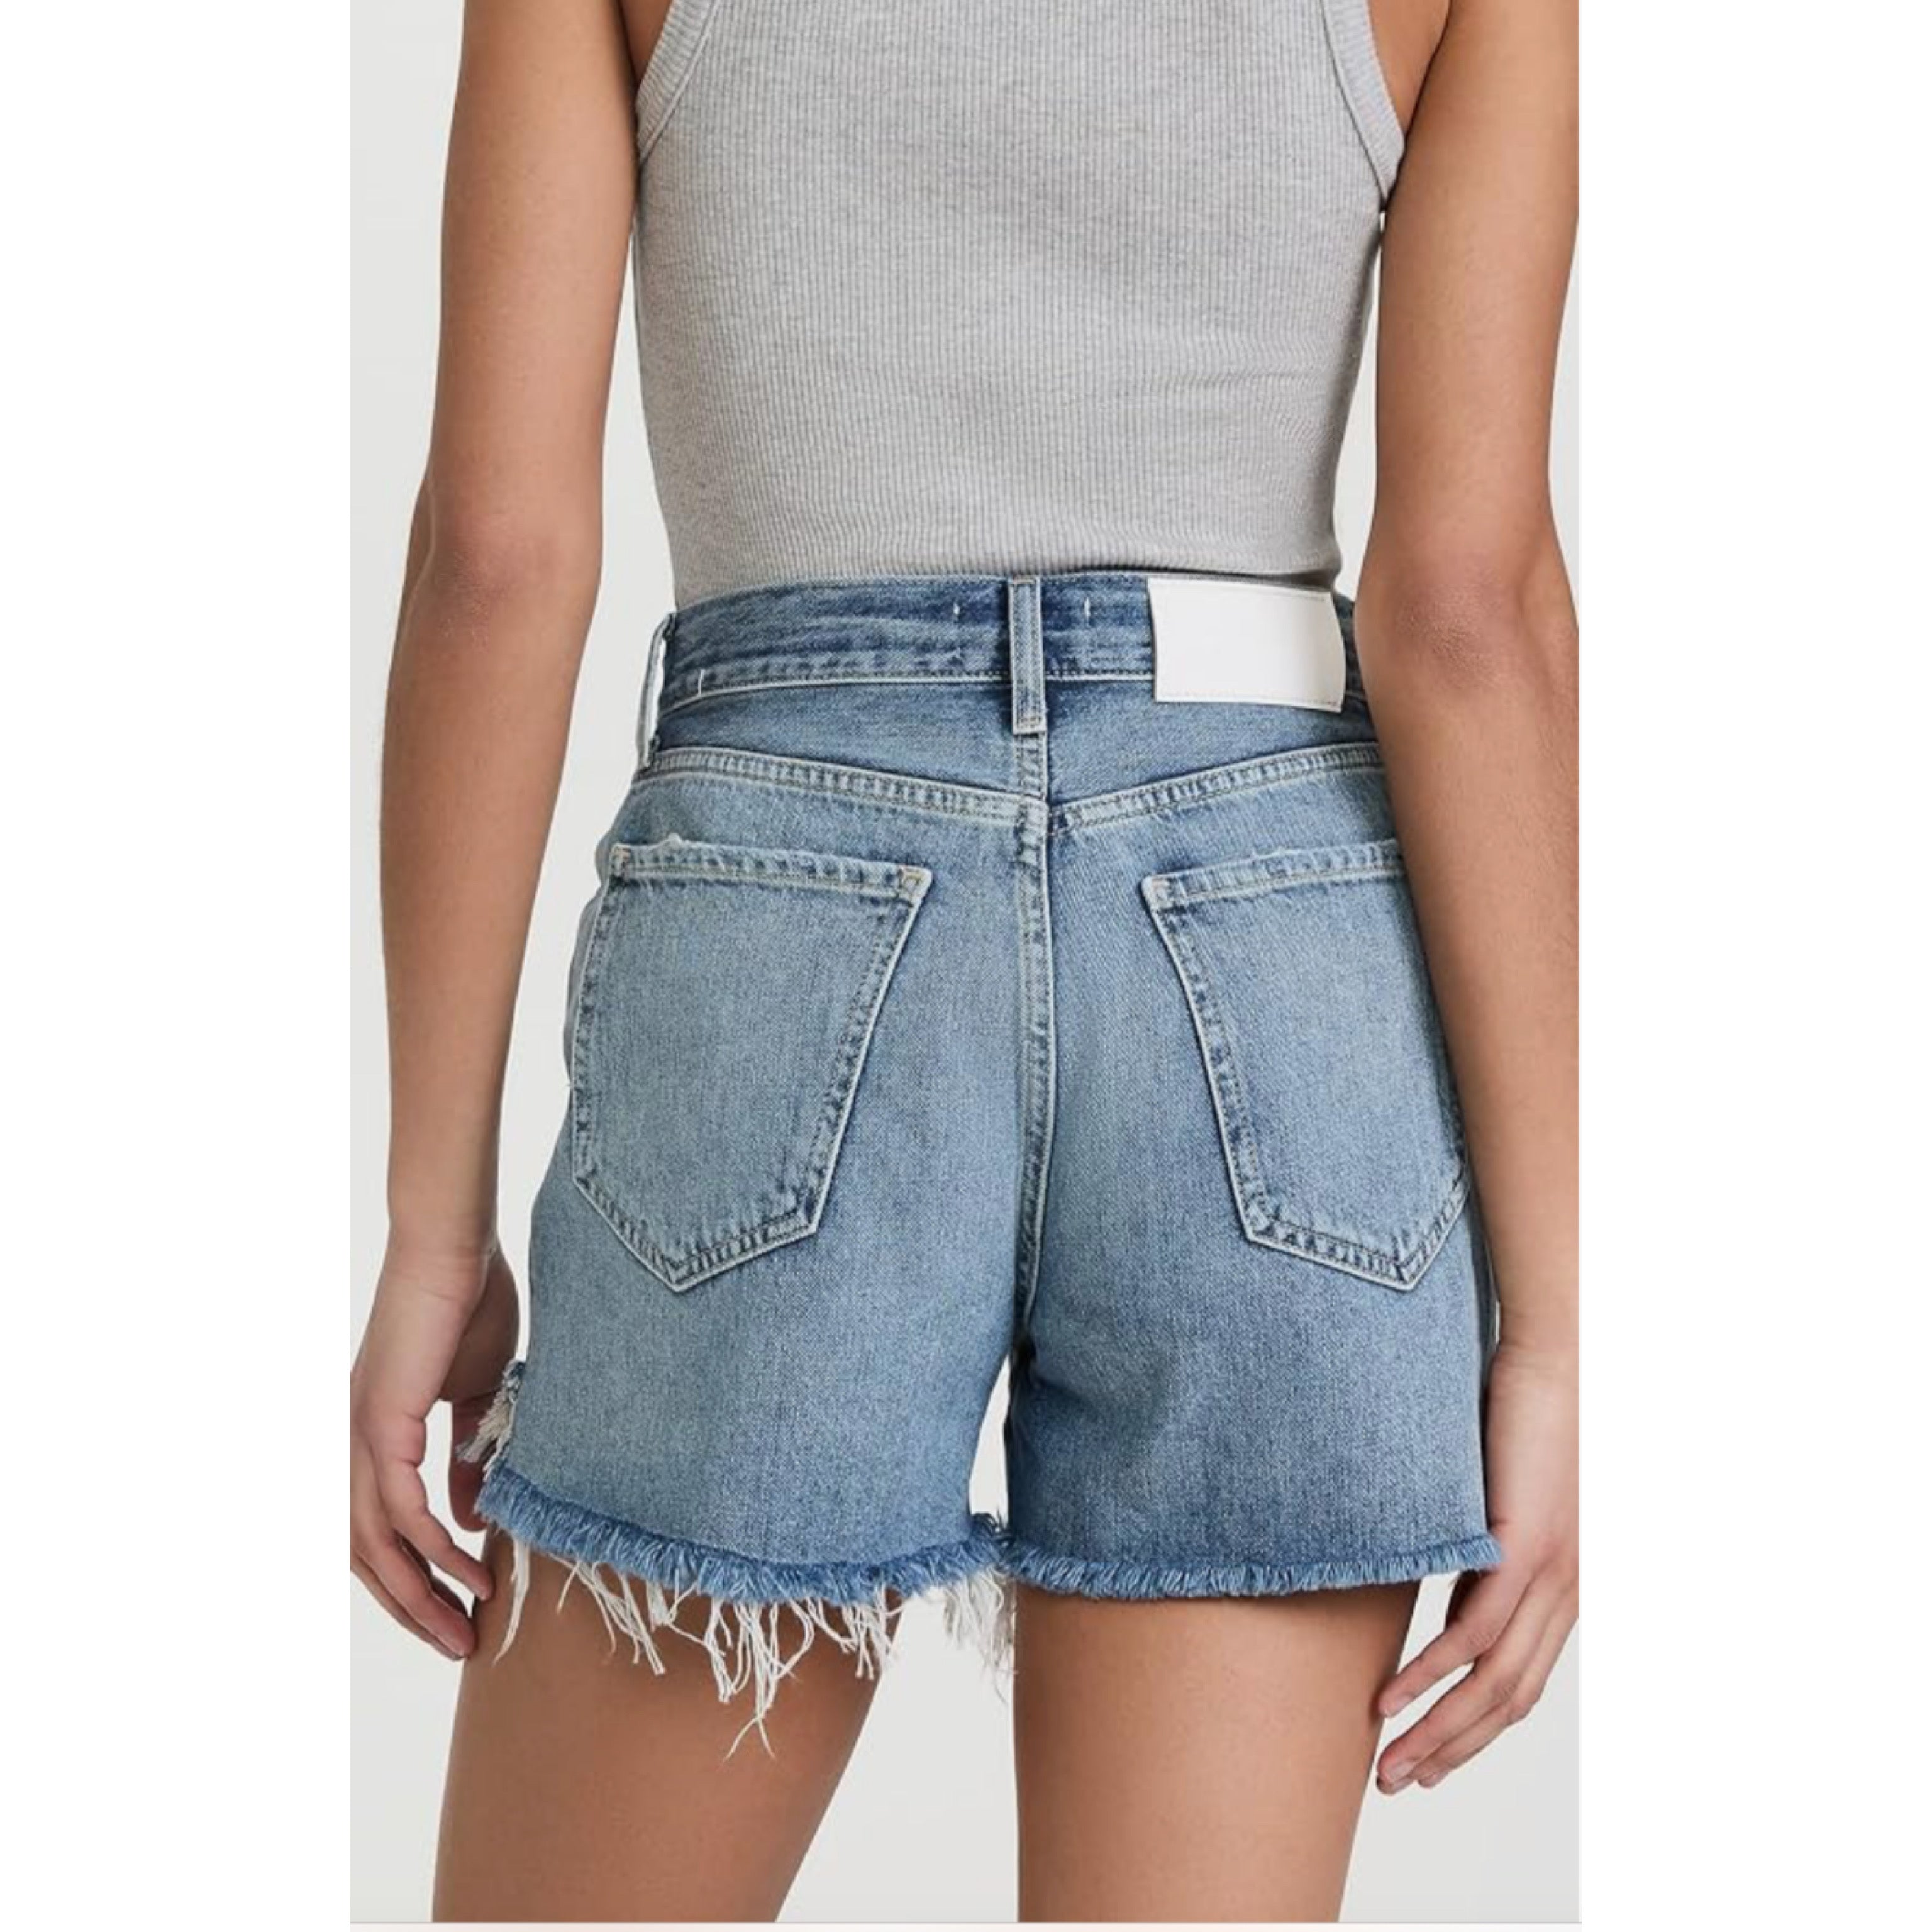 7 for all Mankind easy Ruby cutoff shorts, size 30, NEW WITH TAGS!